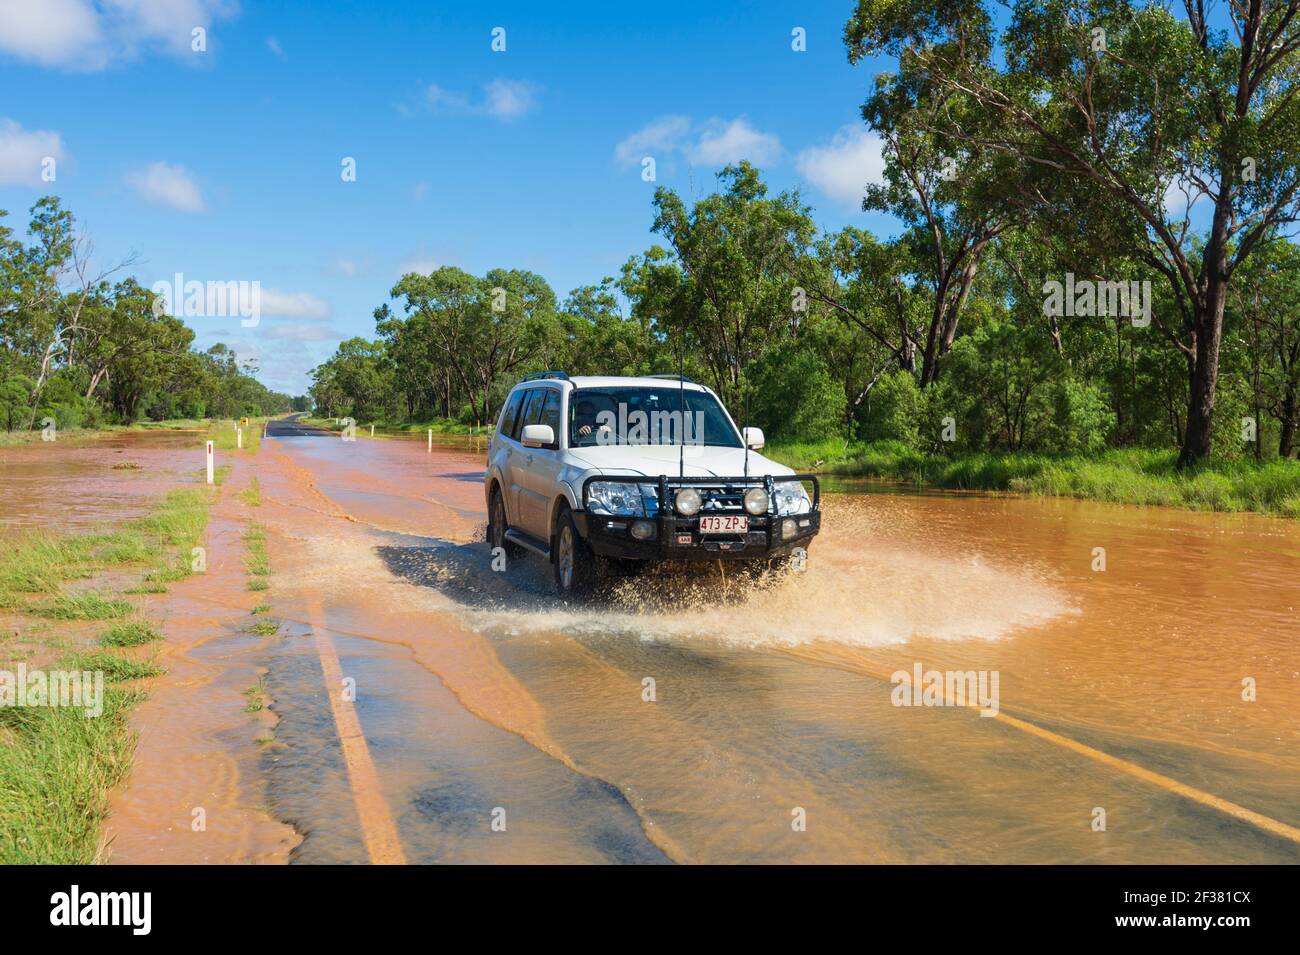 A car driving through floods on a remote Outback road covered in red mud after a storm, near Thallon, Queensland, QLD, Australia Stock Photo